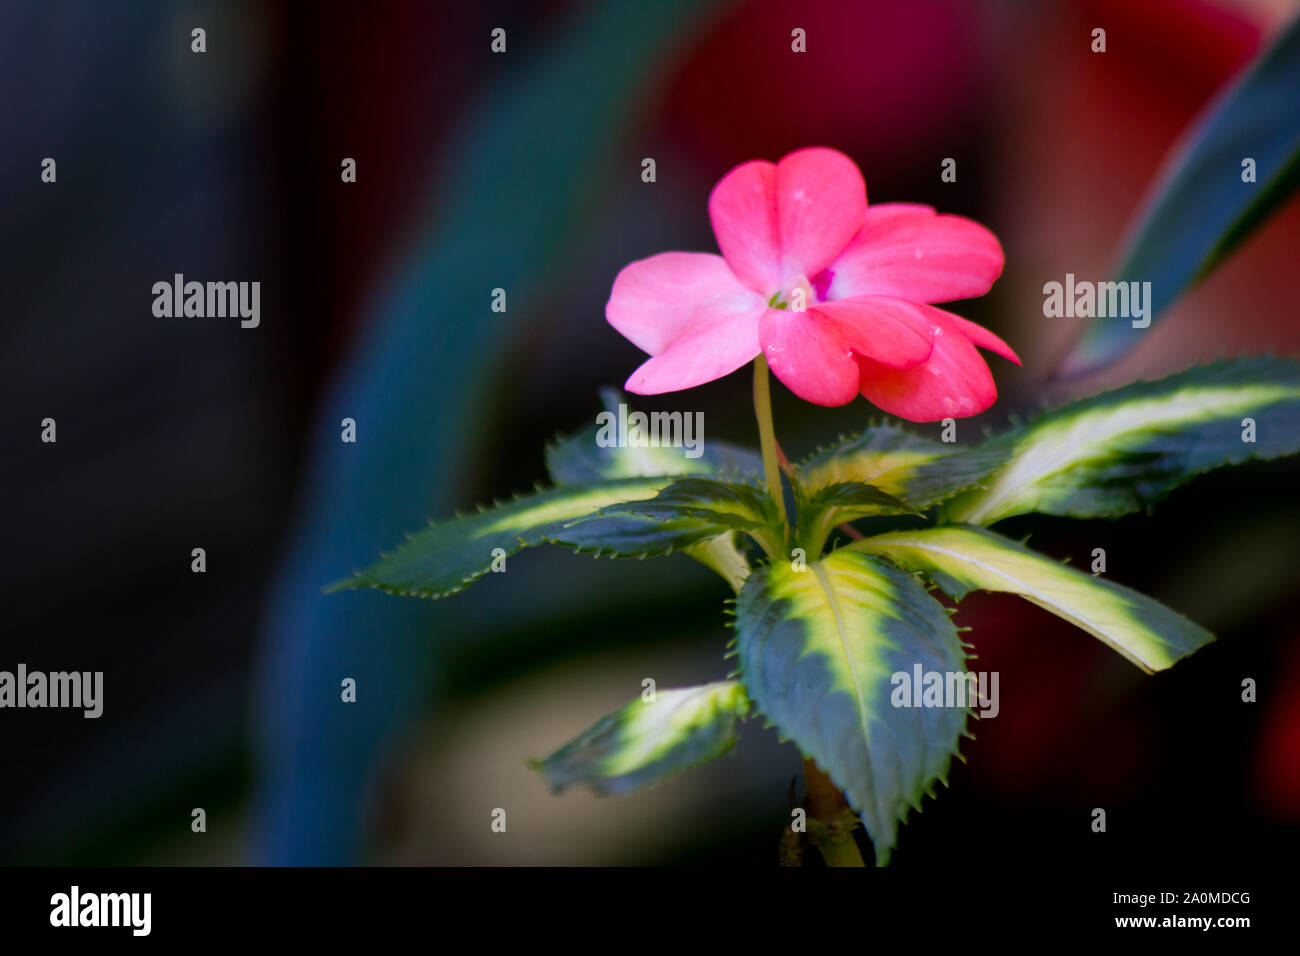 Pink impatiens flower against out-of-focus background. Sub-species of the Balsaminaceae family. These flowers can occur in many different colors. Stock Photo